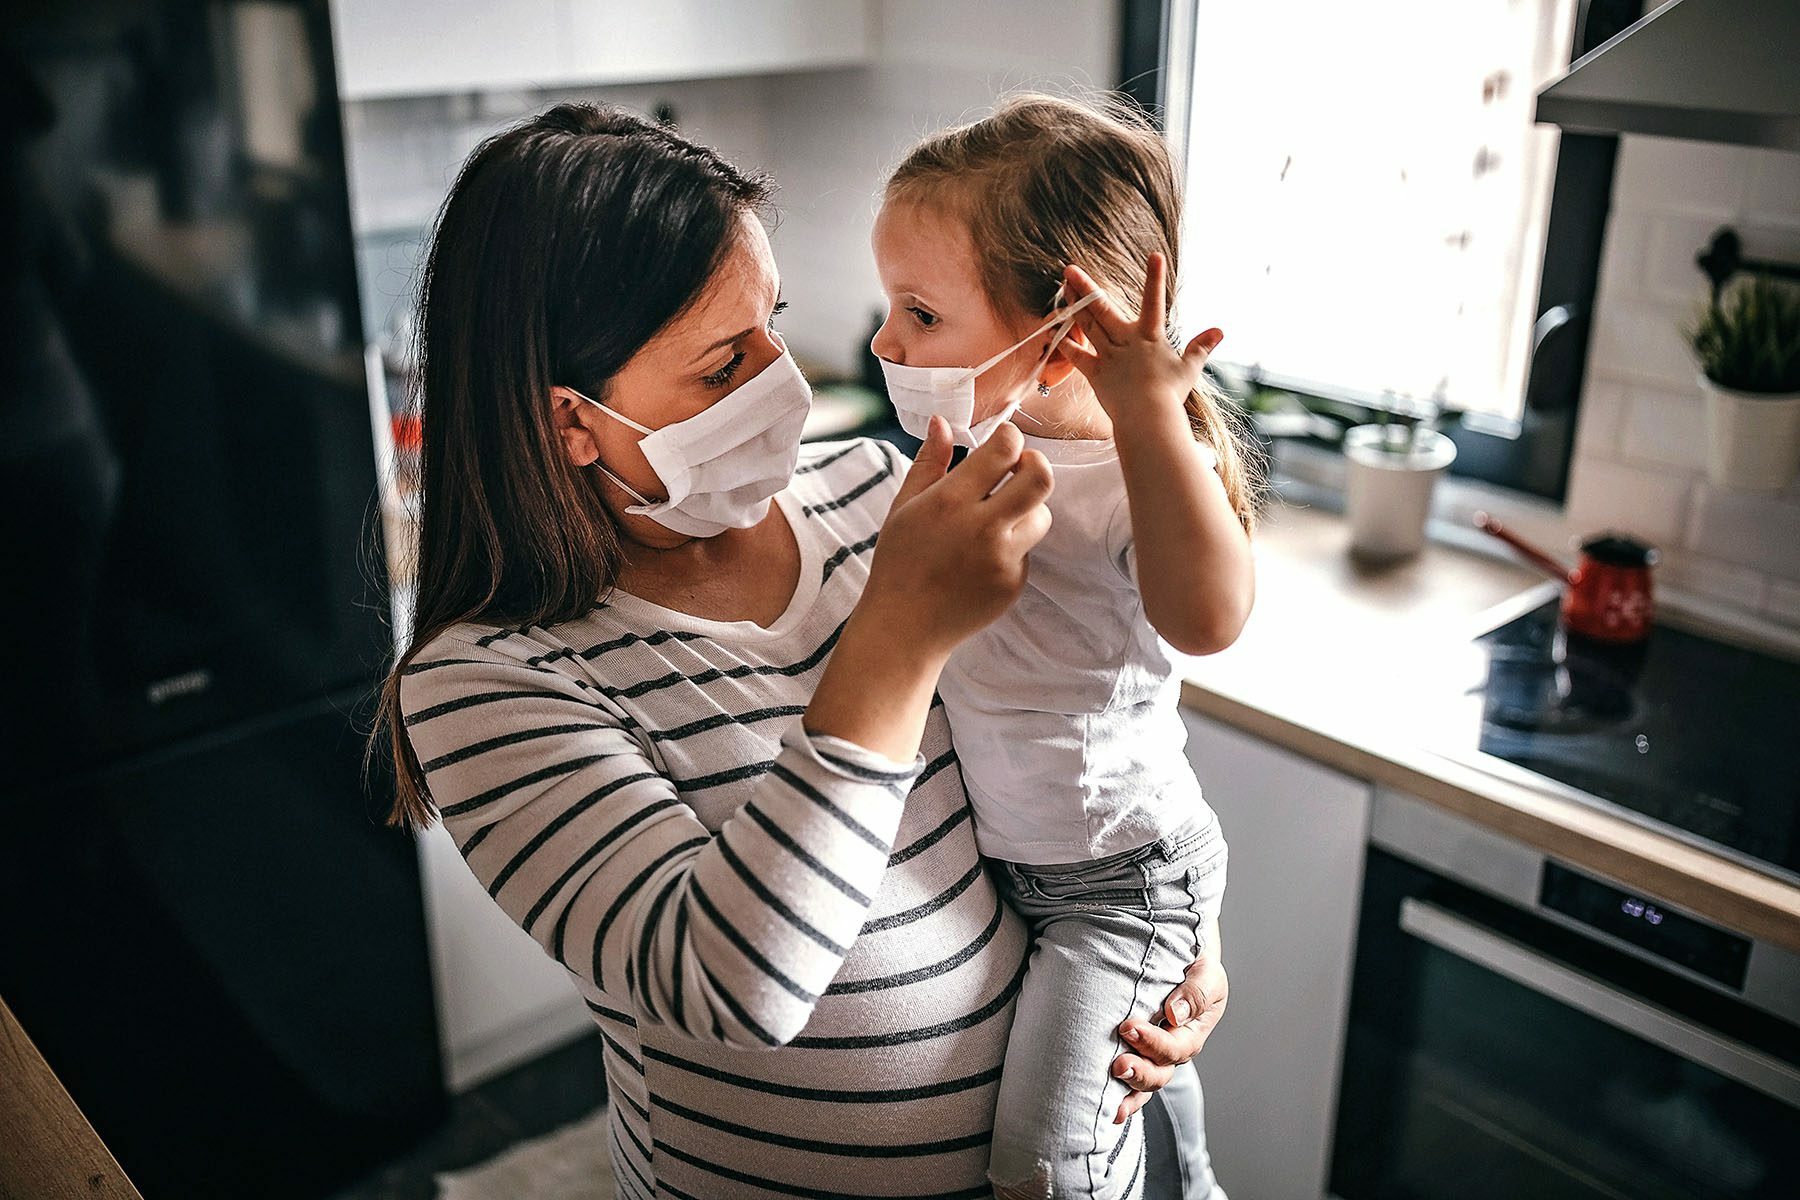 A pregnant woman wearing a face mask helps her young daughter put her face mask on.